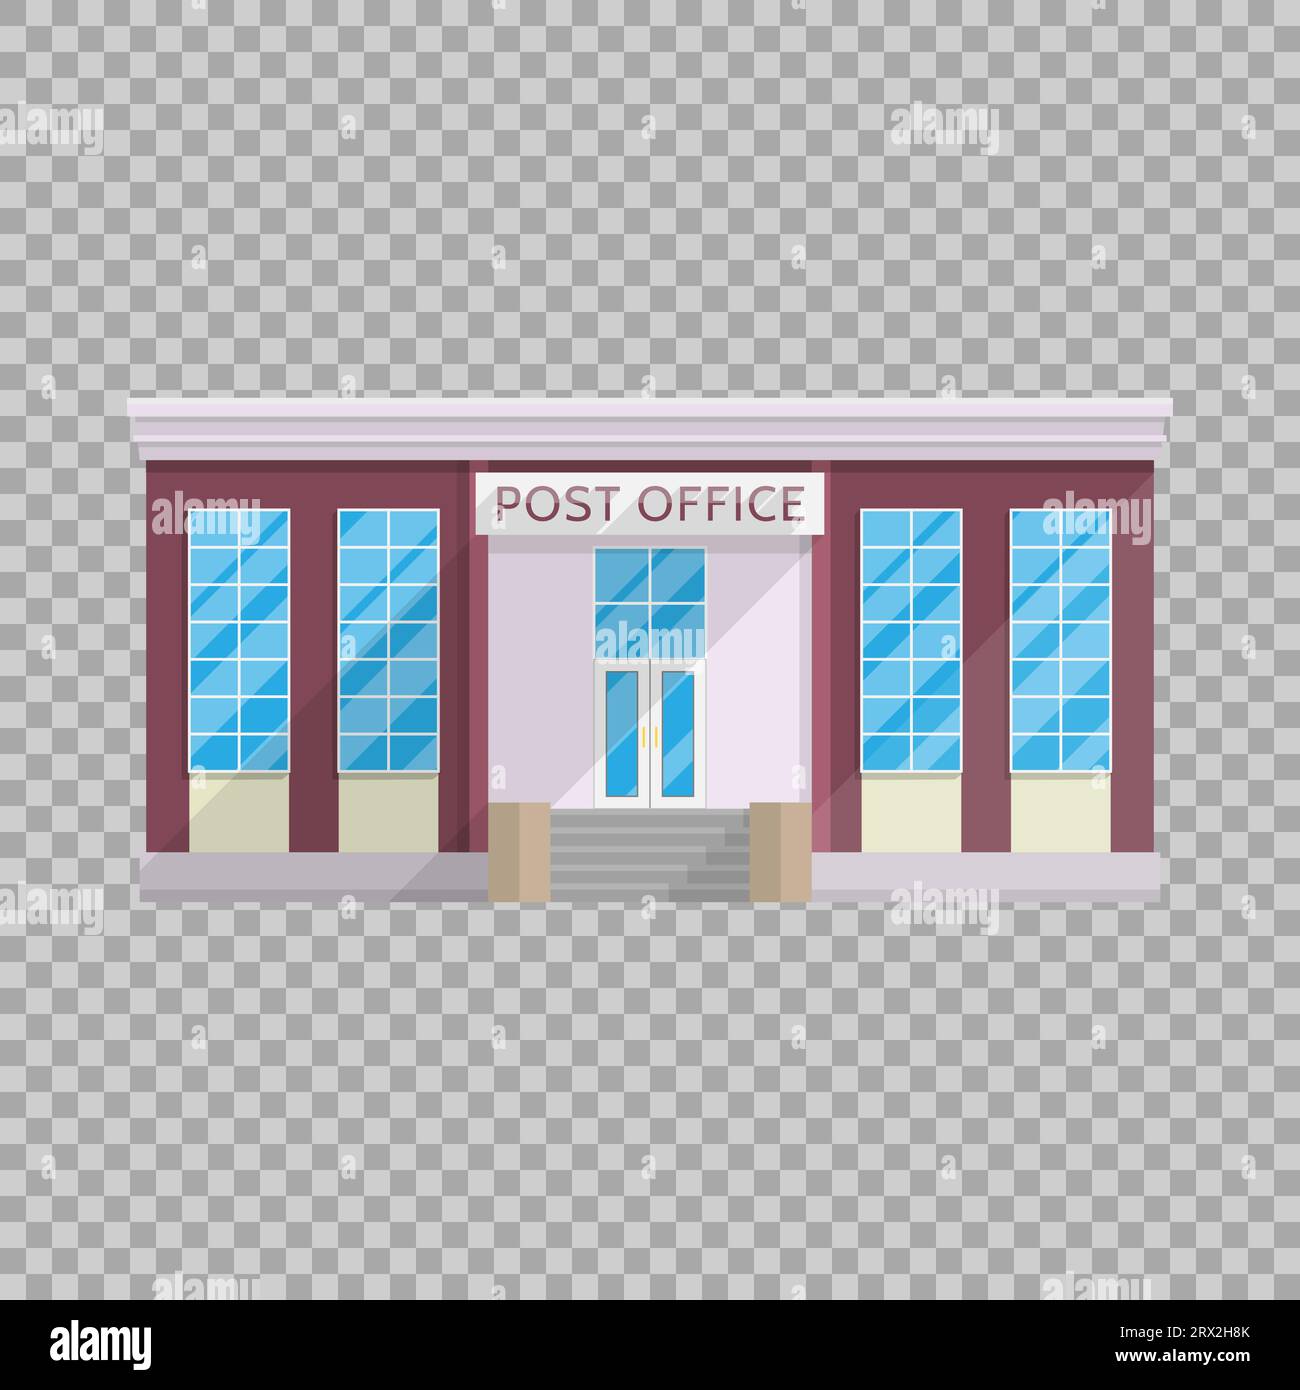 Post office building in flat style isolated on transparent background Vector illustration. Sending mail, parcels, letters, symbol for your projects. Stock Vector